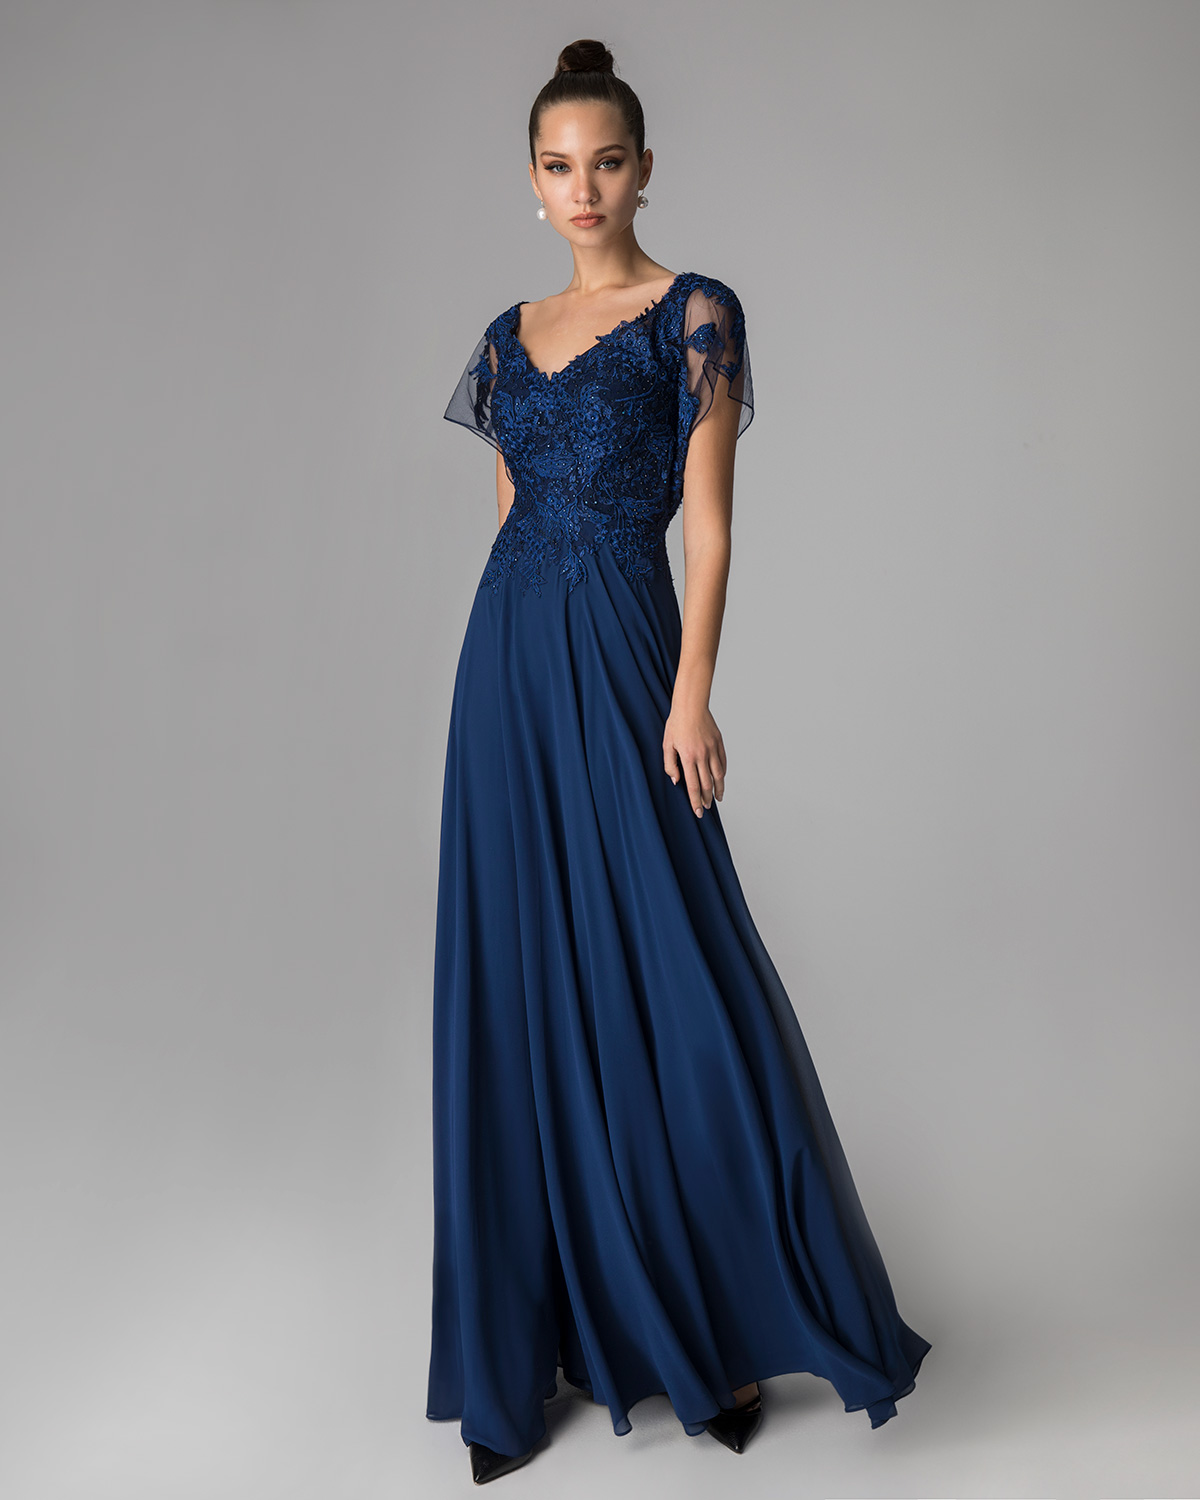 Classic Dresses / Long evening dress with applique lace on the top and  short sleeves